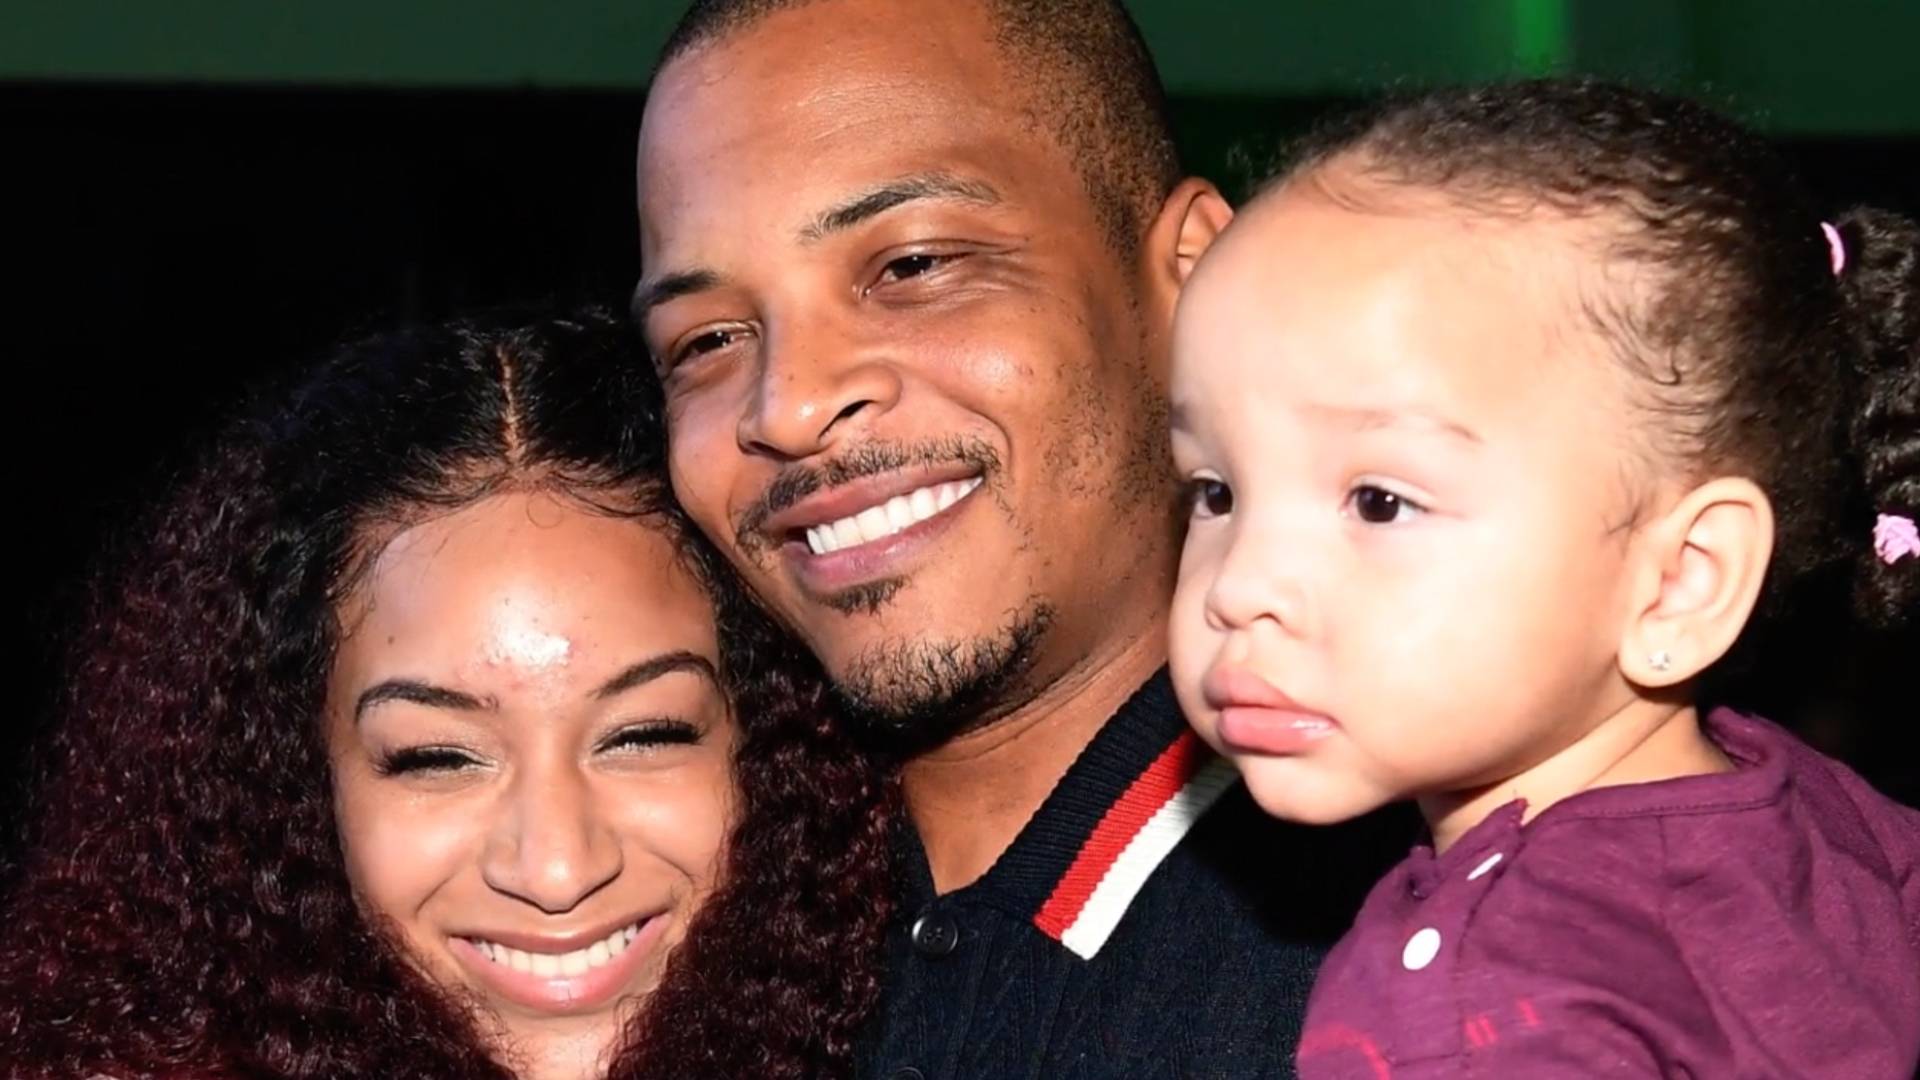 Deyjah, T.I., and Heiress on BET BUZZ 2020.